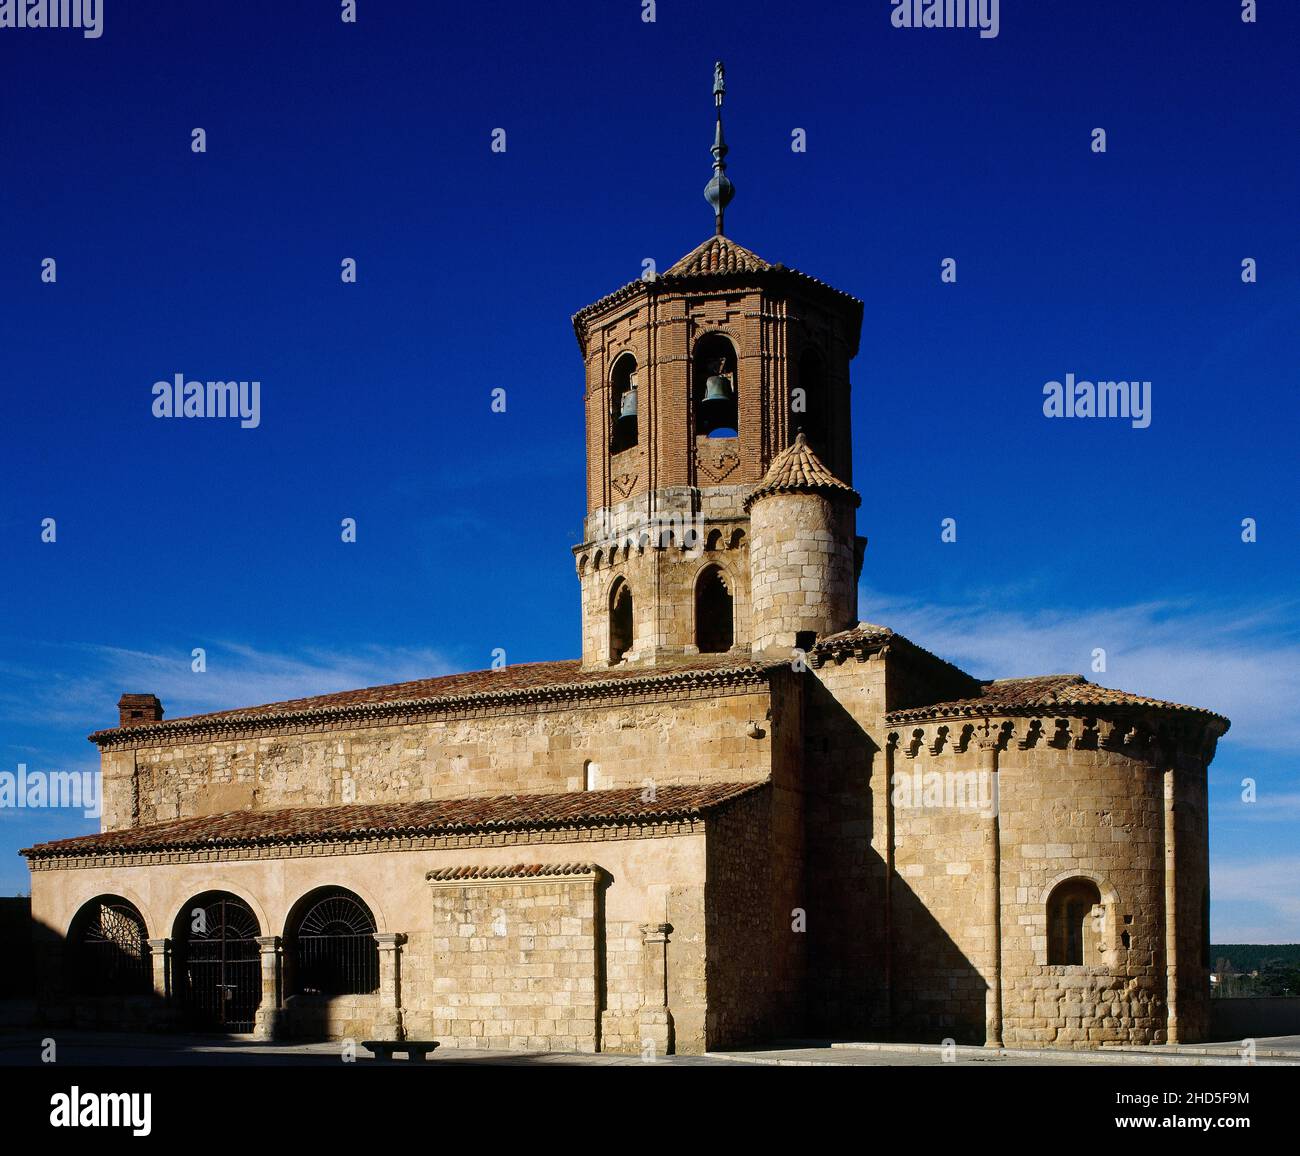 Spain, Castile and Leon, province of  Soria, Almazán. Church of Saint Michael. General view of the church. It was built in the mid-12th century, after the conquest of the town by King Alfonso I the Battler in 1128. Only the portico, part of the naves and the lower part of the tower remain from the Romanesque period. Stock Photo